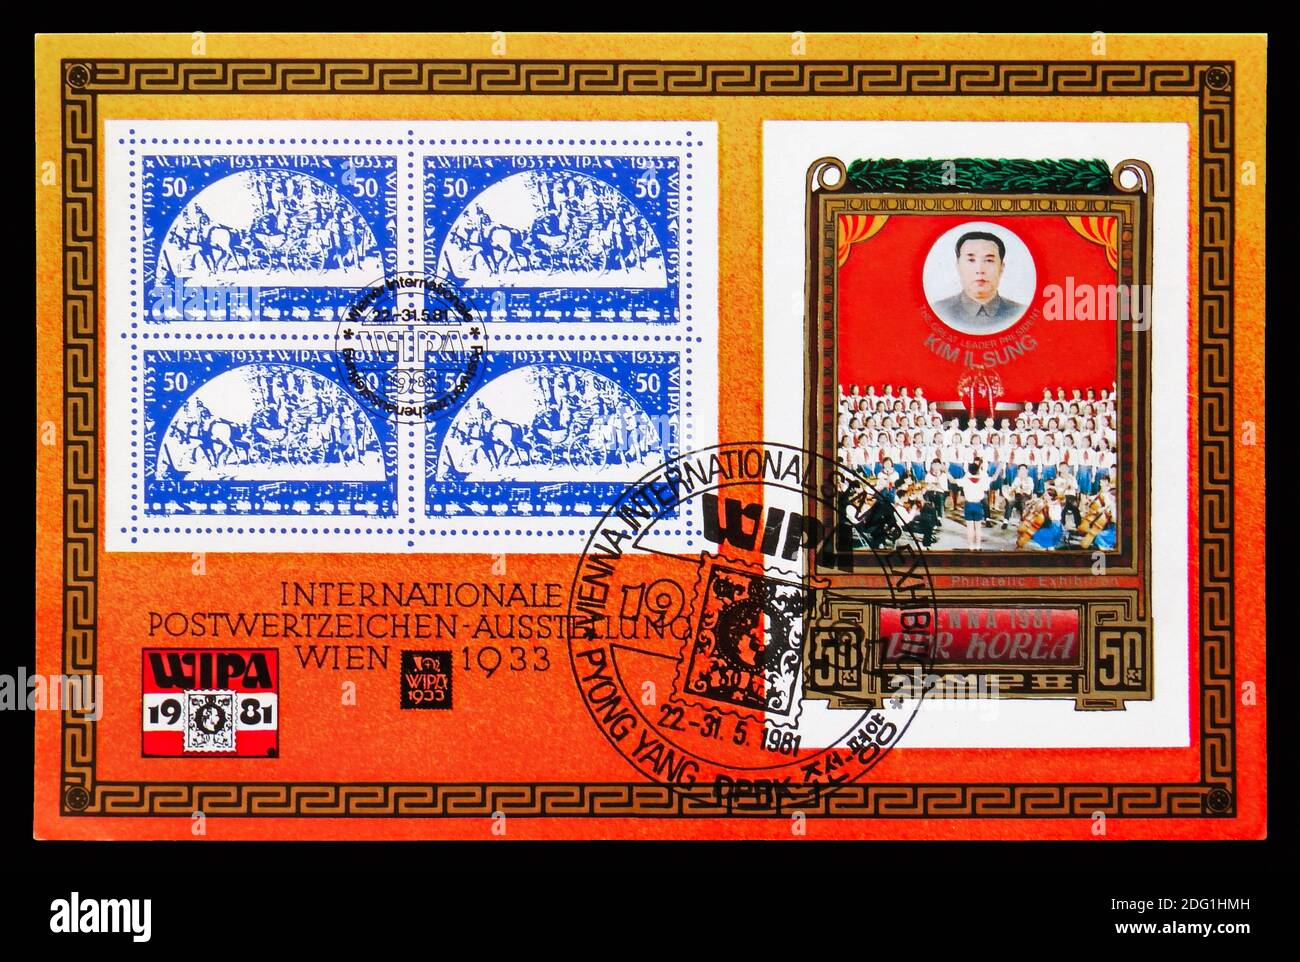 MOSCOW, RUSSIA - AUGUST 18, 2018: A stamp printed in Korea shows President Kim Il Sung, International Stamp Exhibition WIPA 1981, Vienna serie, circa Stock Photo